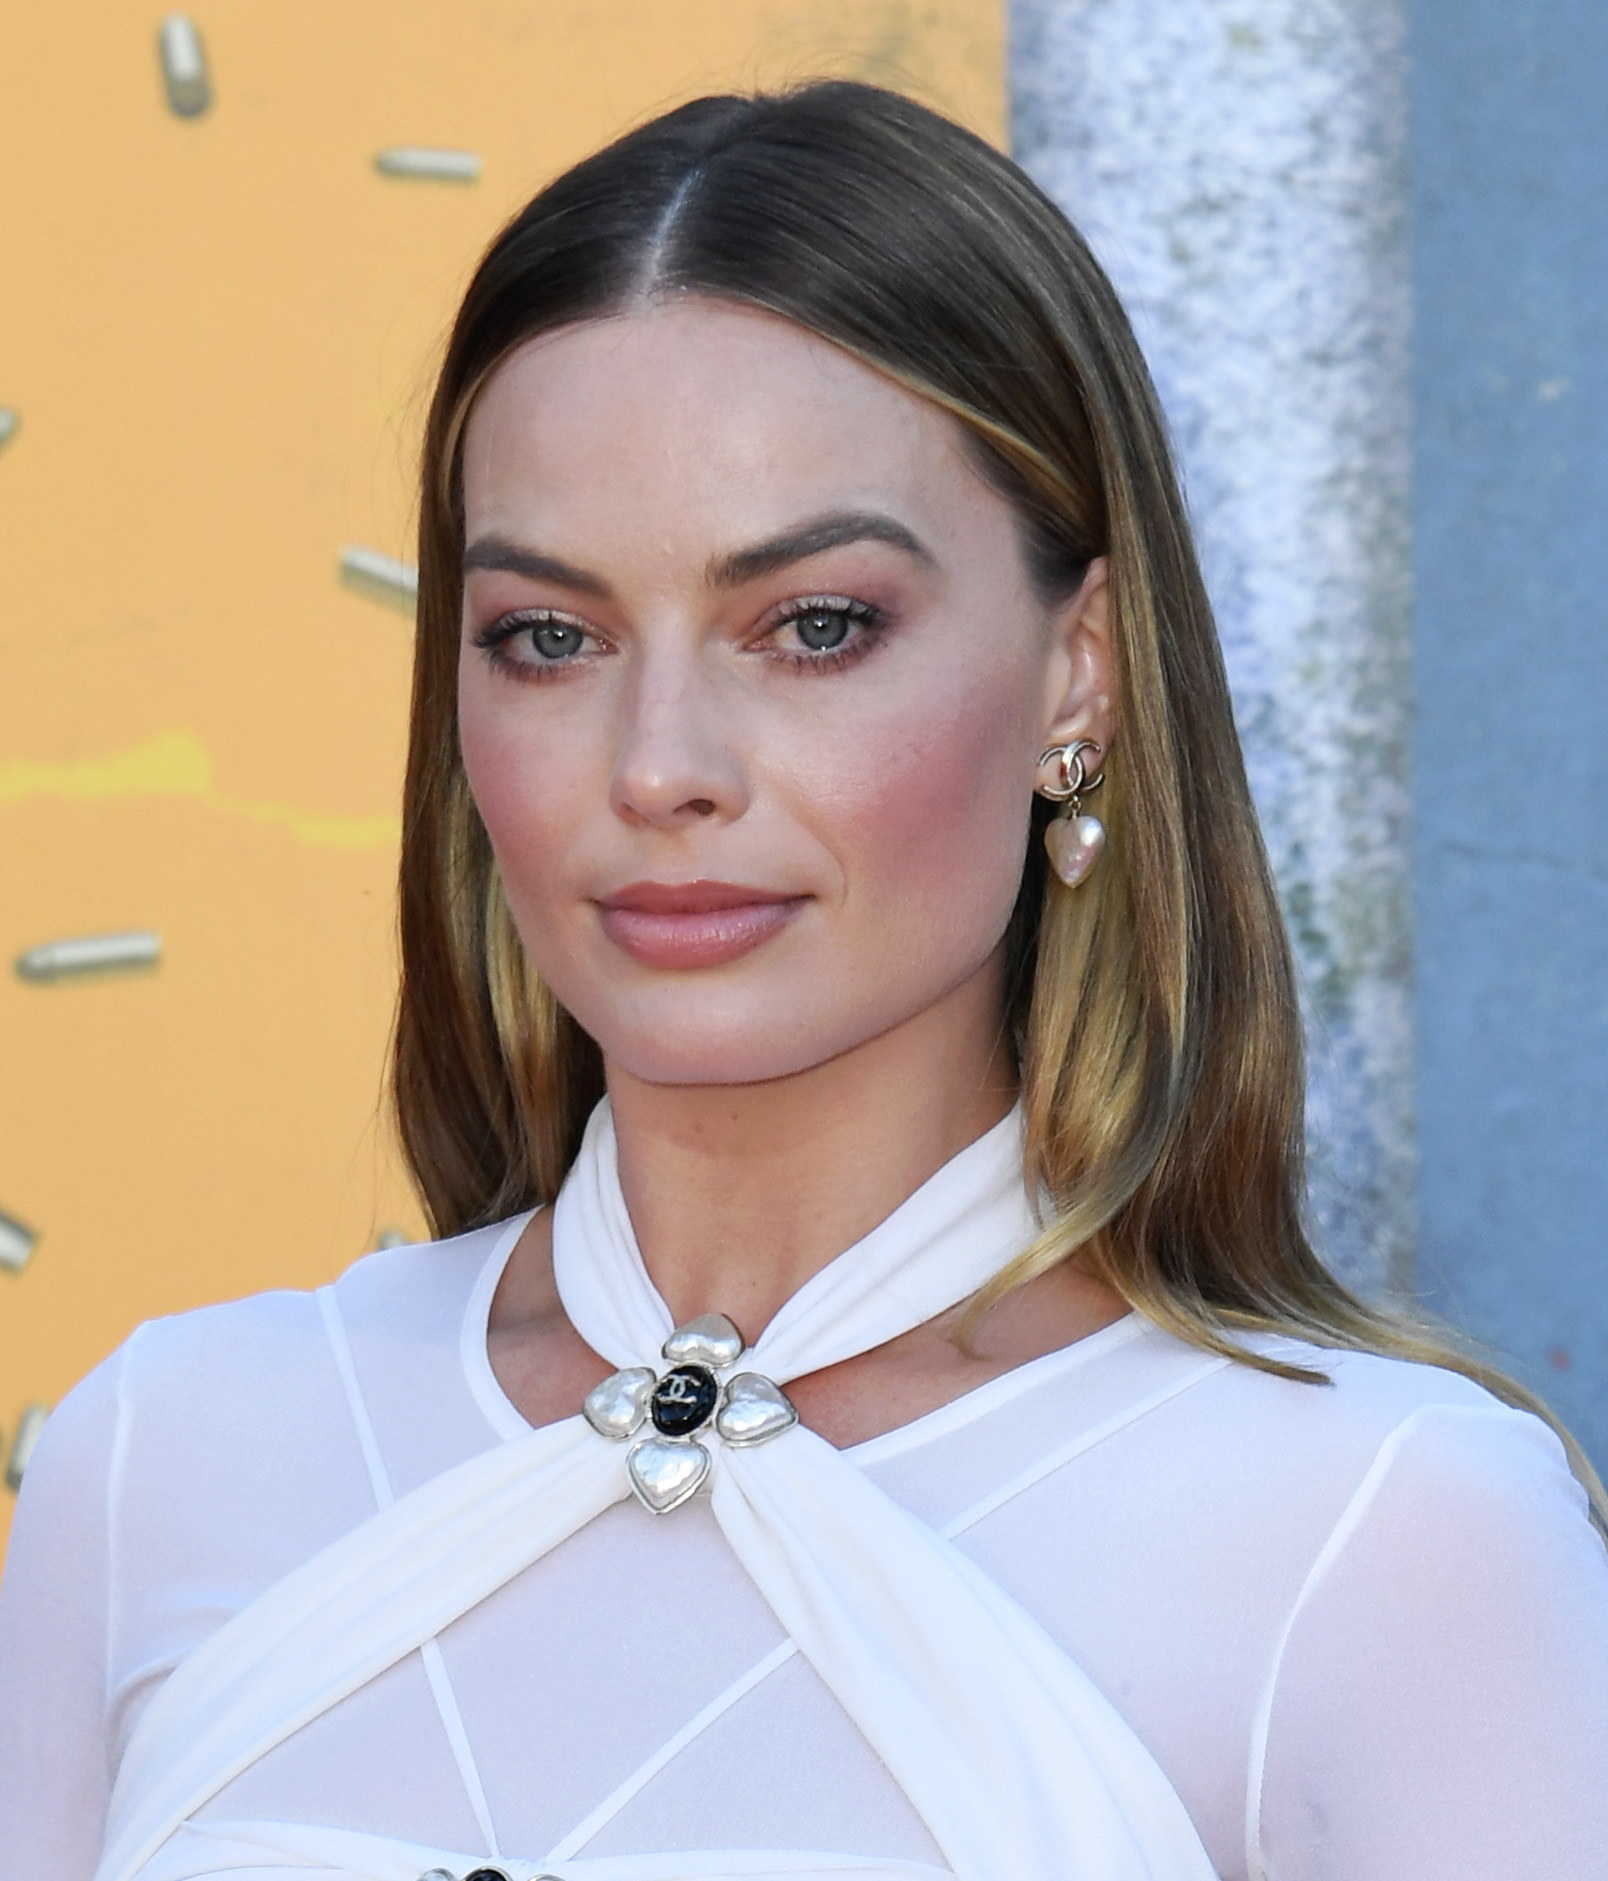 Margot in a white outfit at a red carpet event